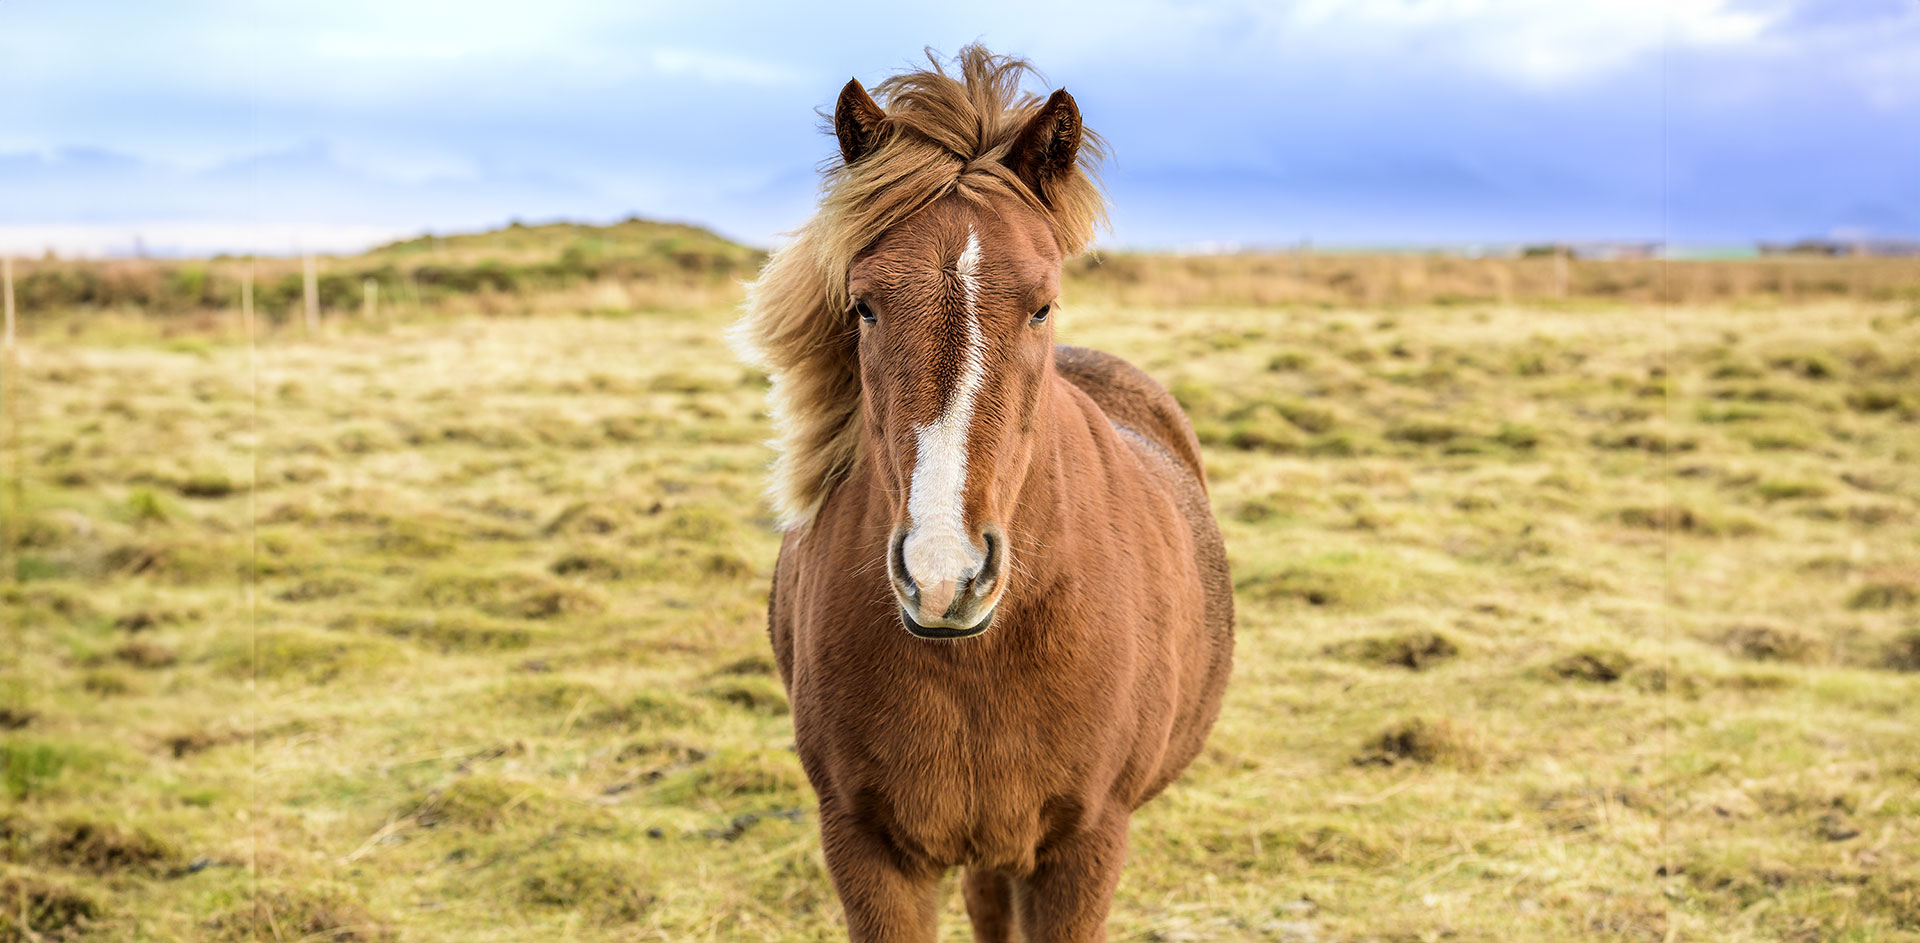 Image of Icelandic horse in a field artificially widened with Generative Fill in Photoshop.